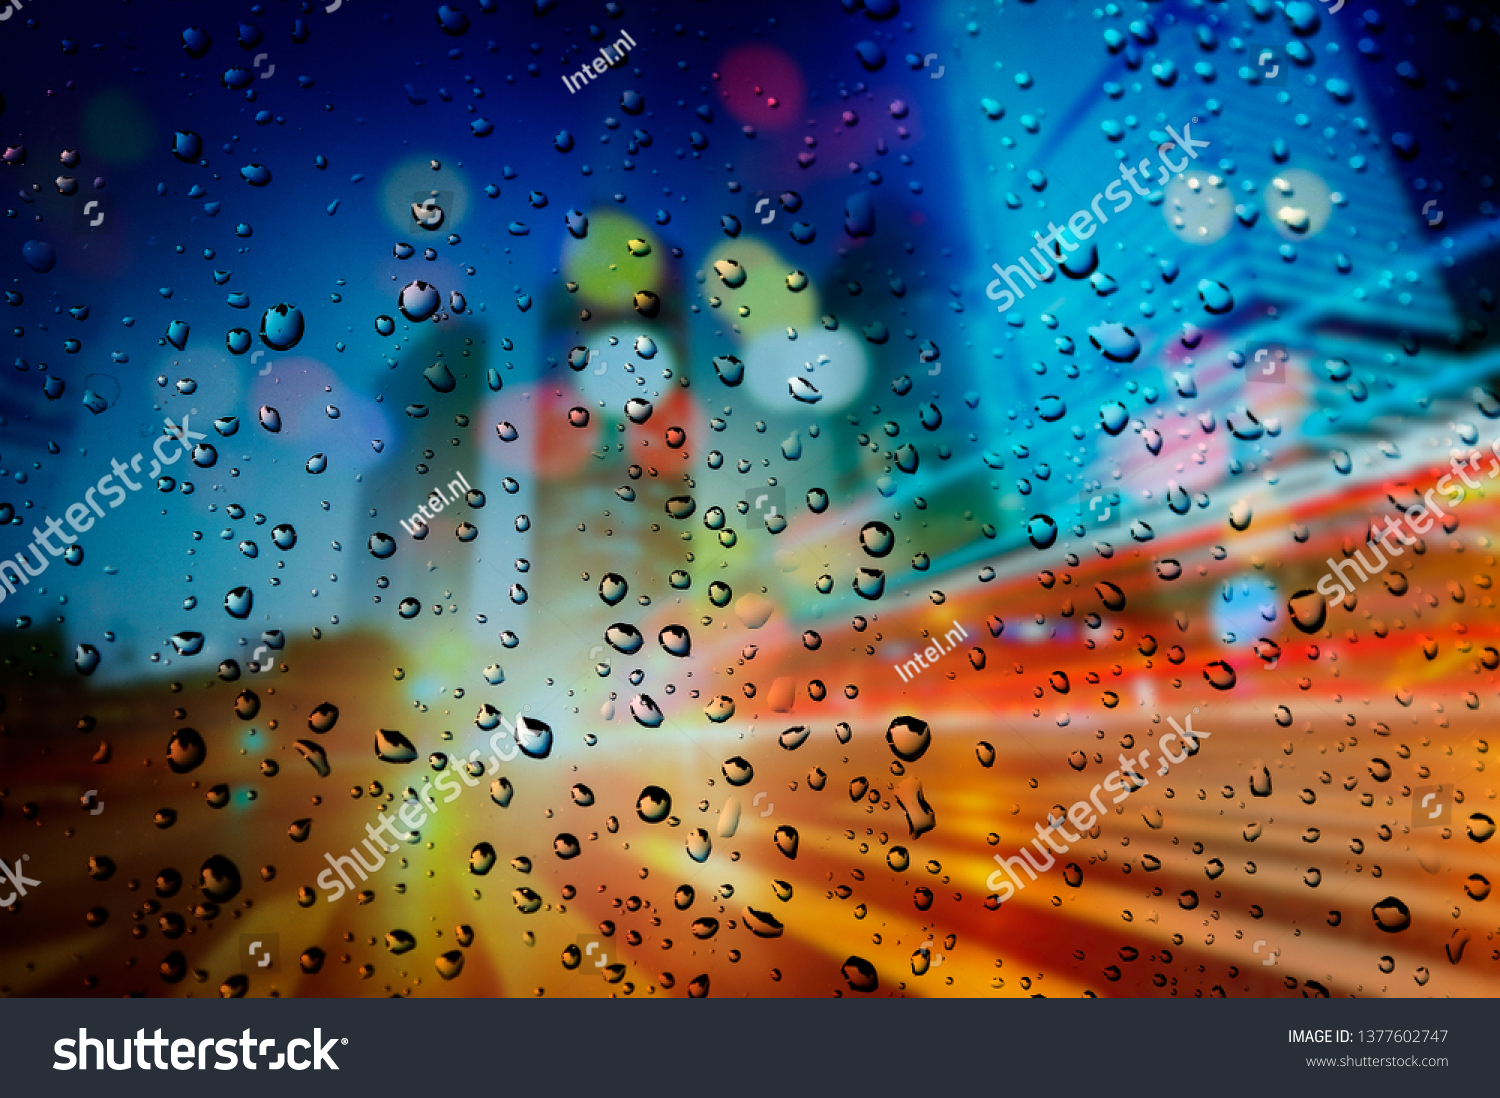  Rainy day. Raindrops on a blurred multicolored bokeh background #1377602747